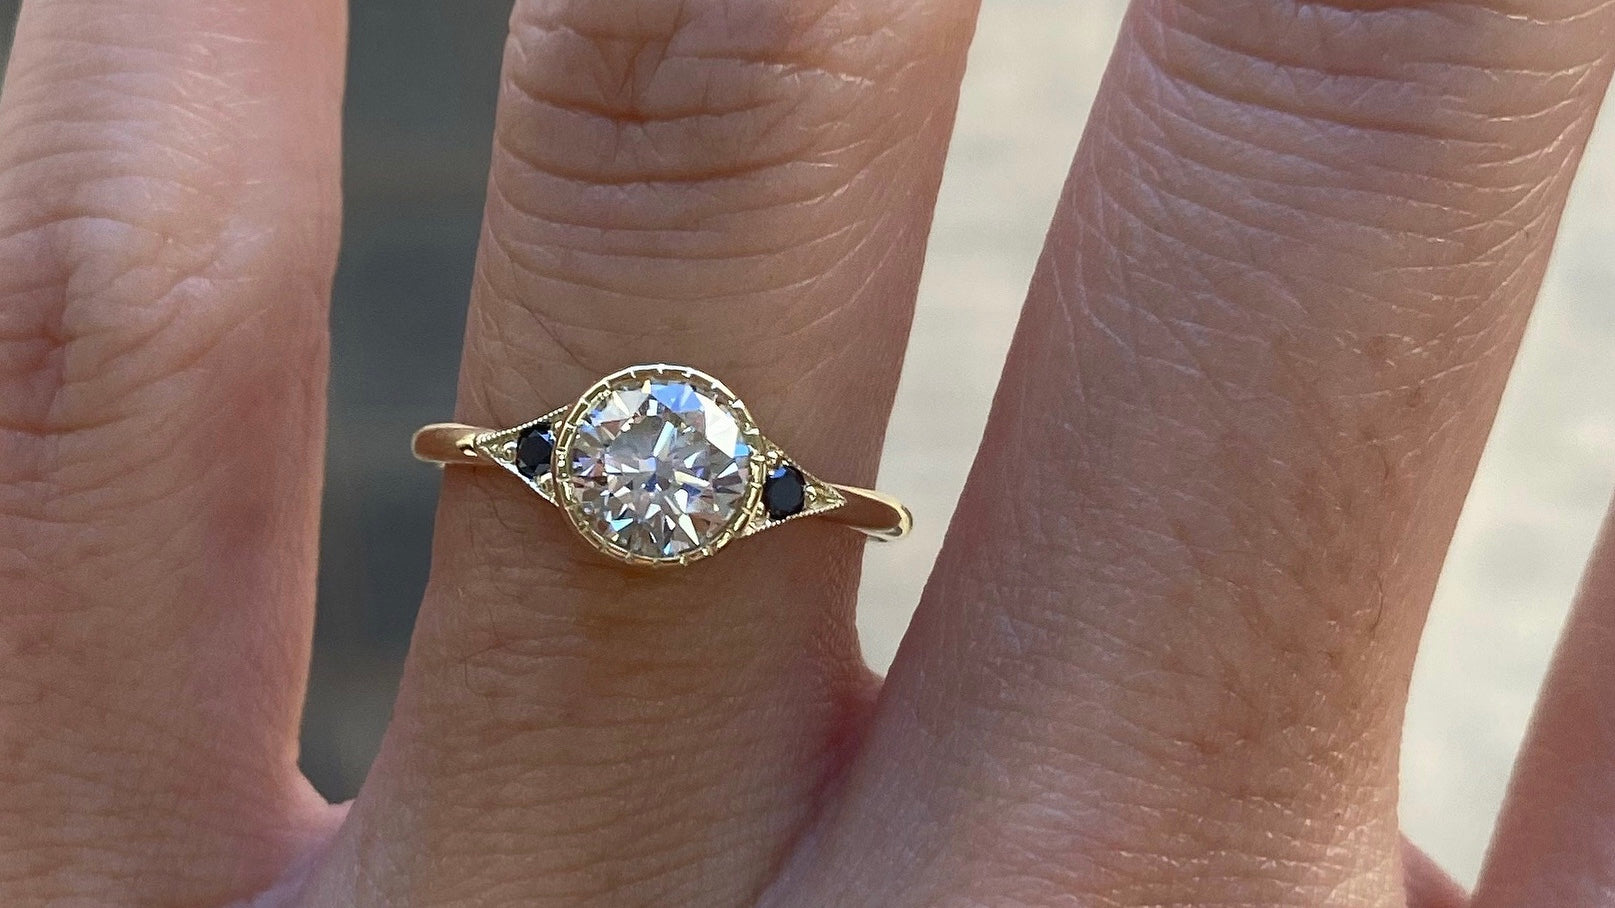 14k yellow gold custom engagement ring with round cut white diamond center stone with blue sapphire side stones and milgrain detail on hand